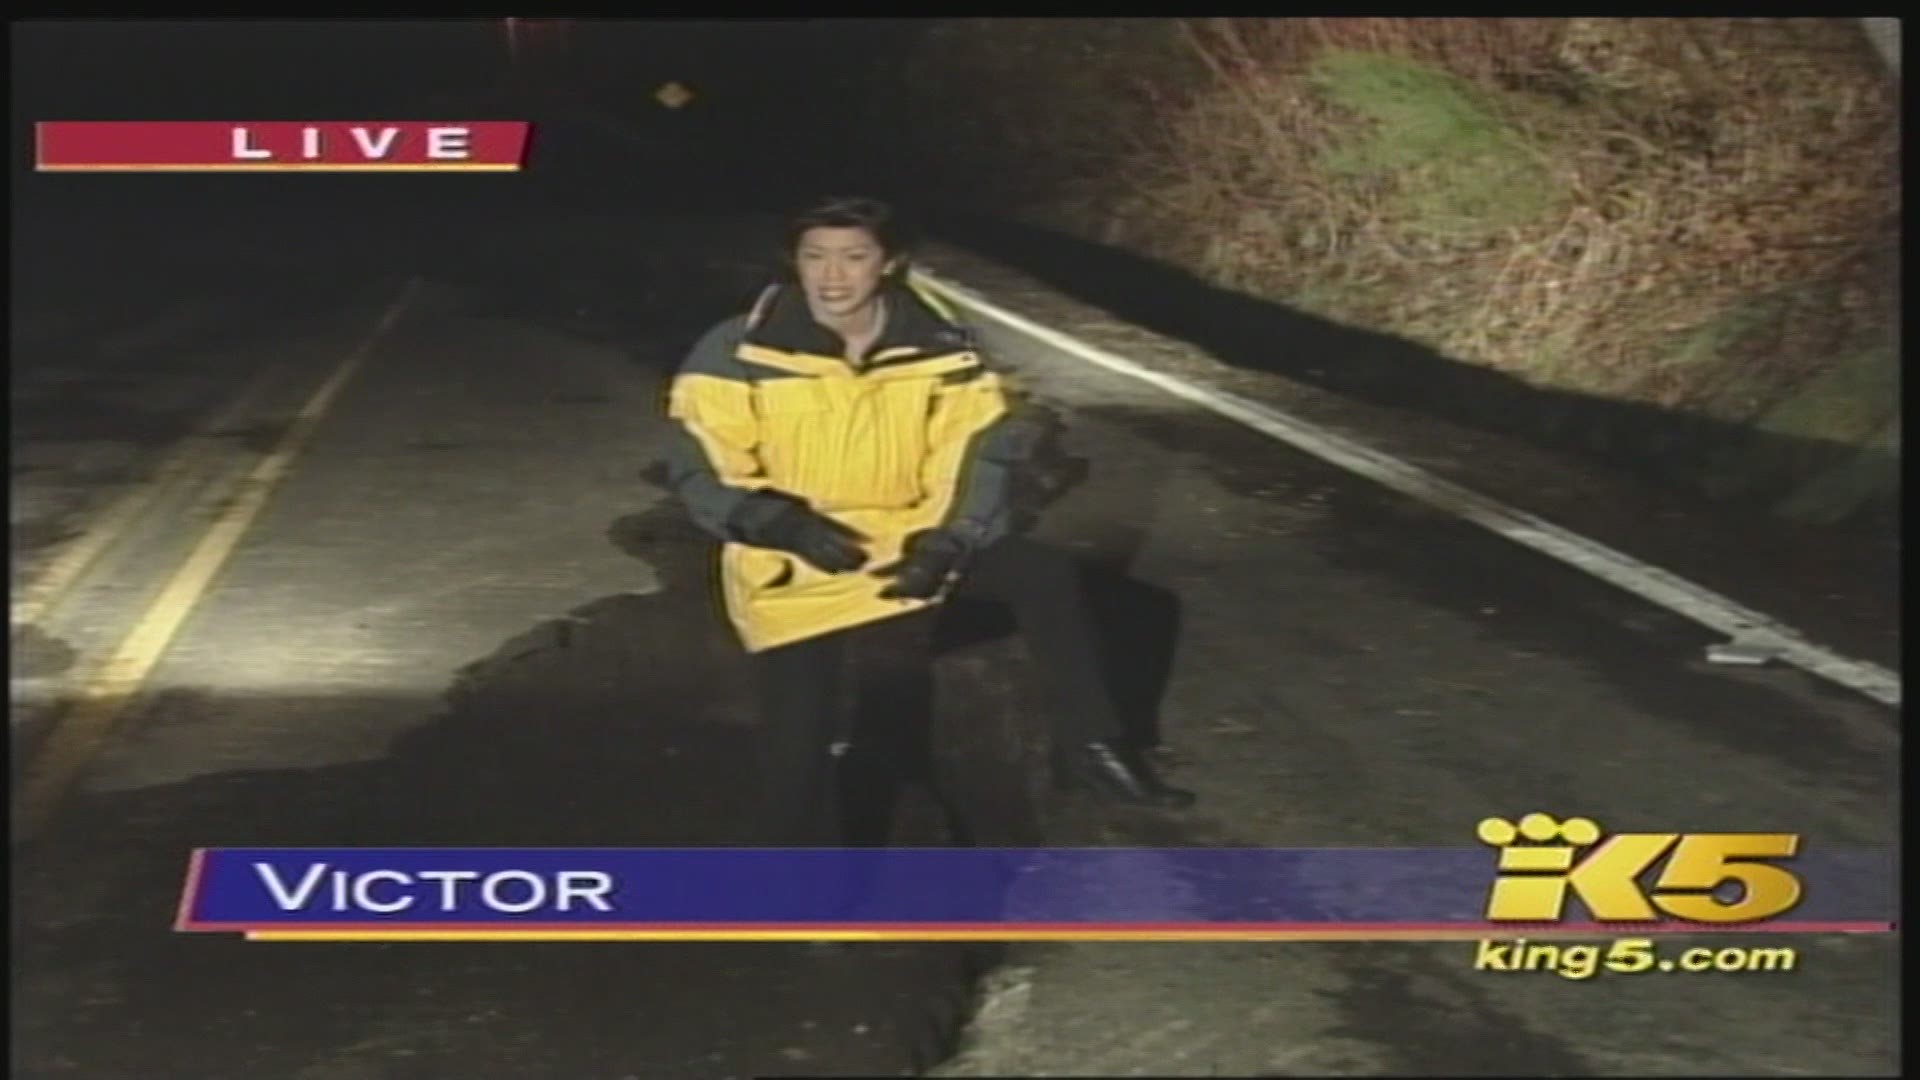 Where were you when the 6.8 Nisqually earthquake struck on Feb. 28, 2001? KING 5 staff share memories from when the quake hit and covering the aftermath.